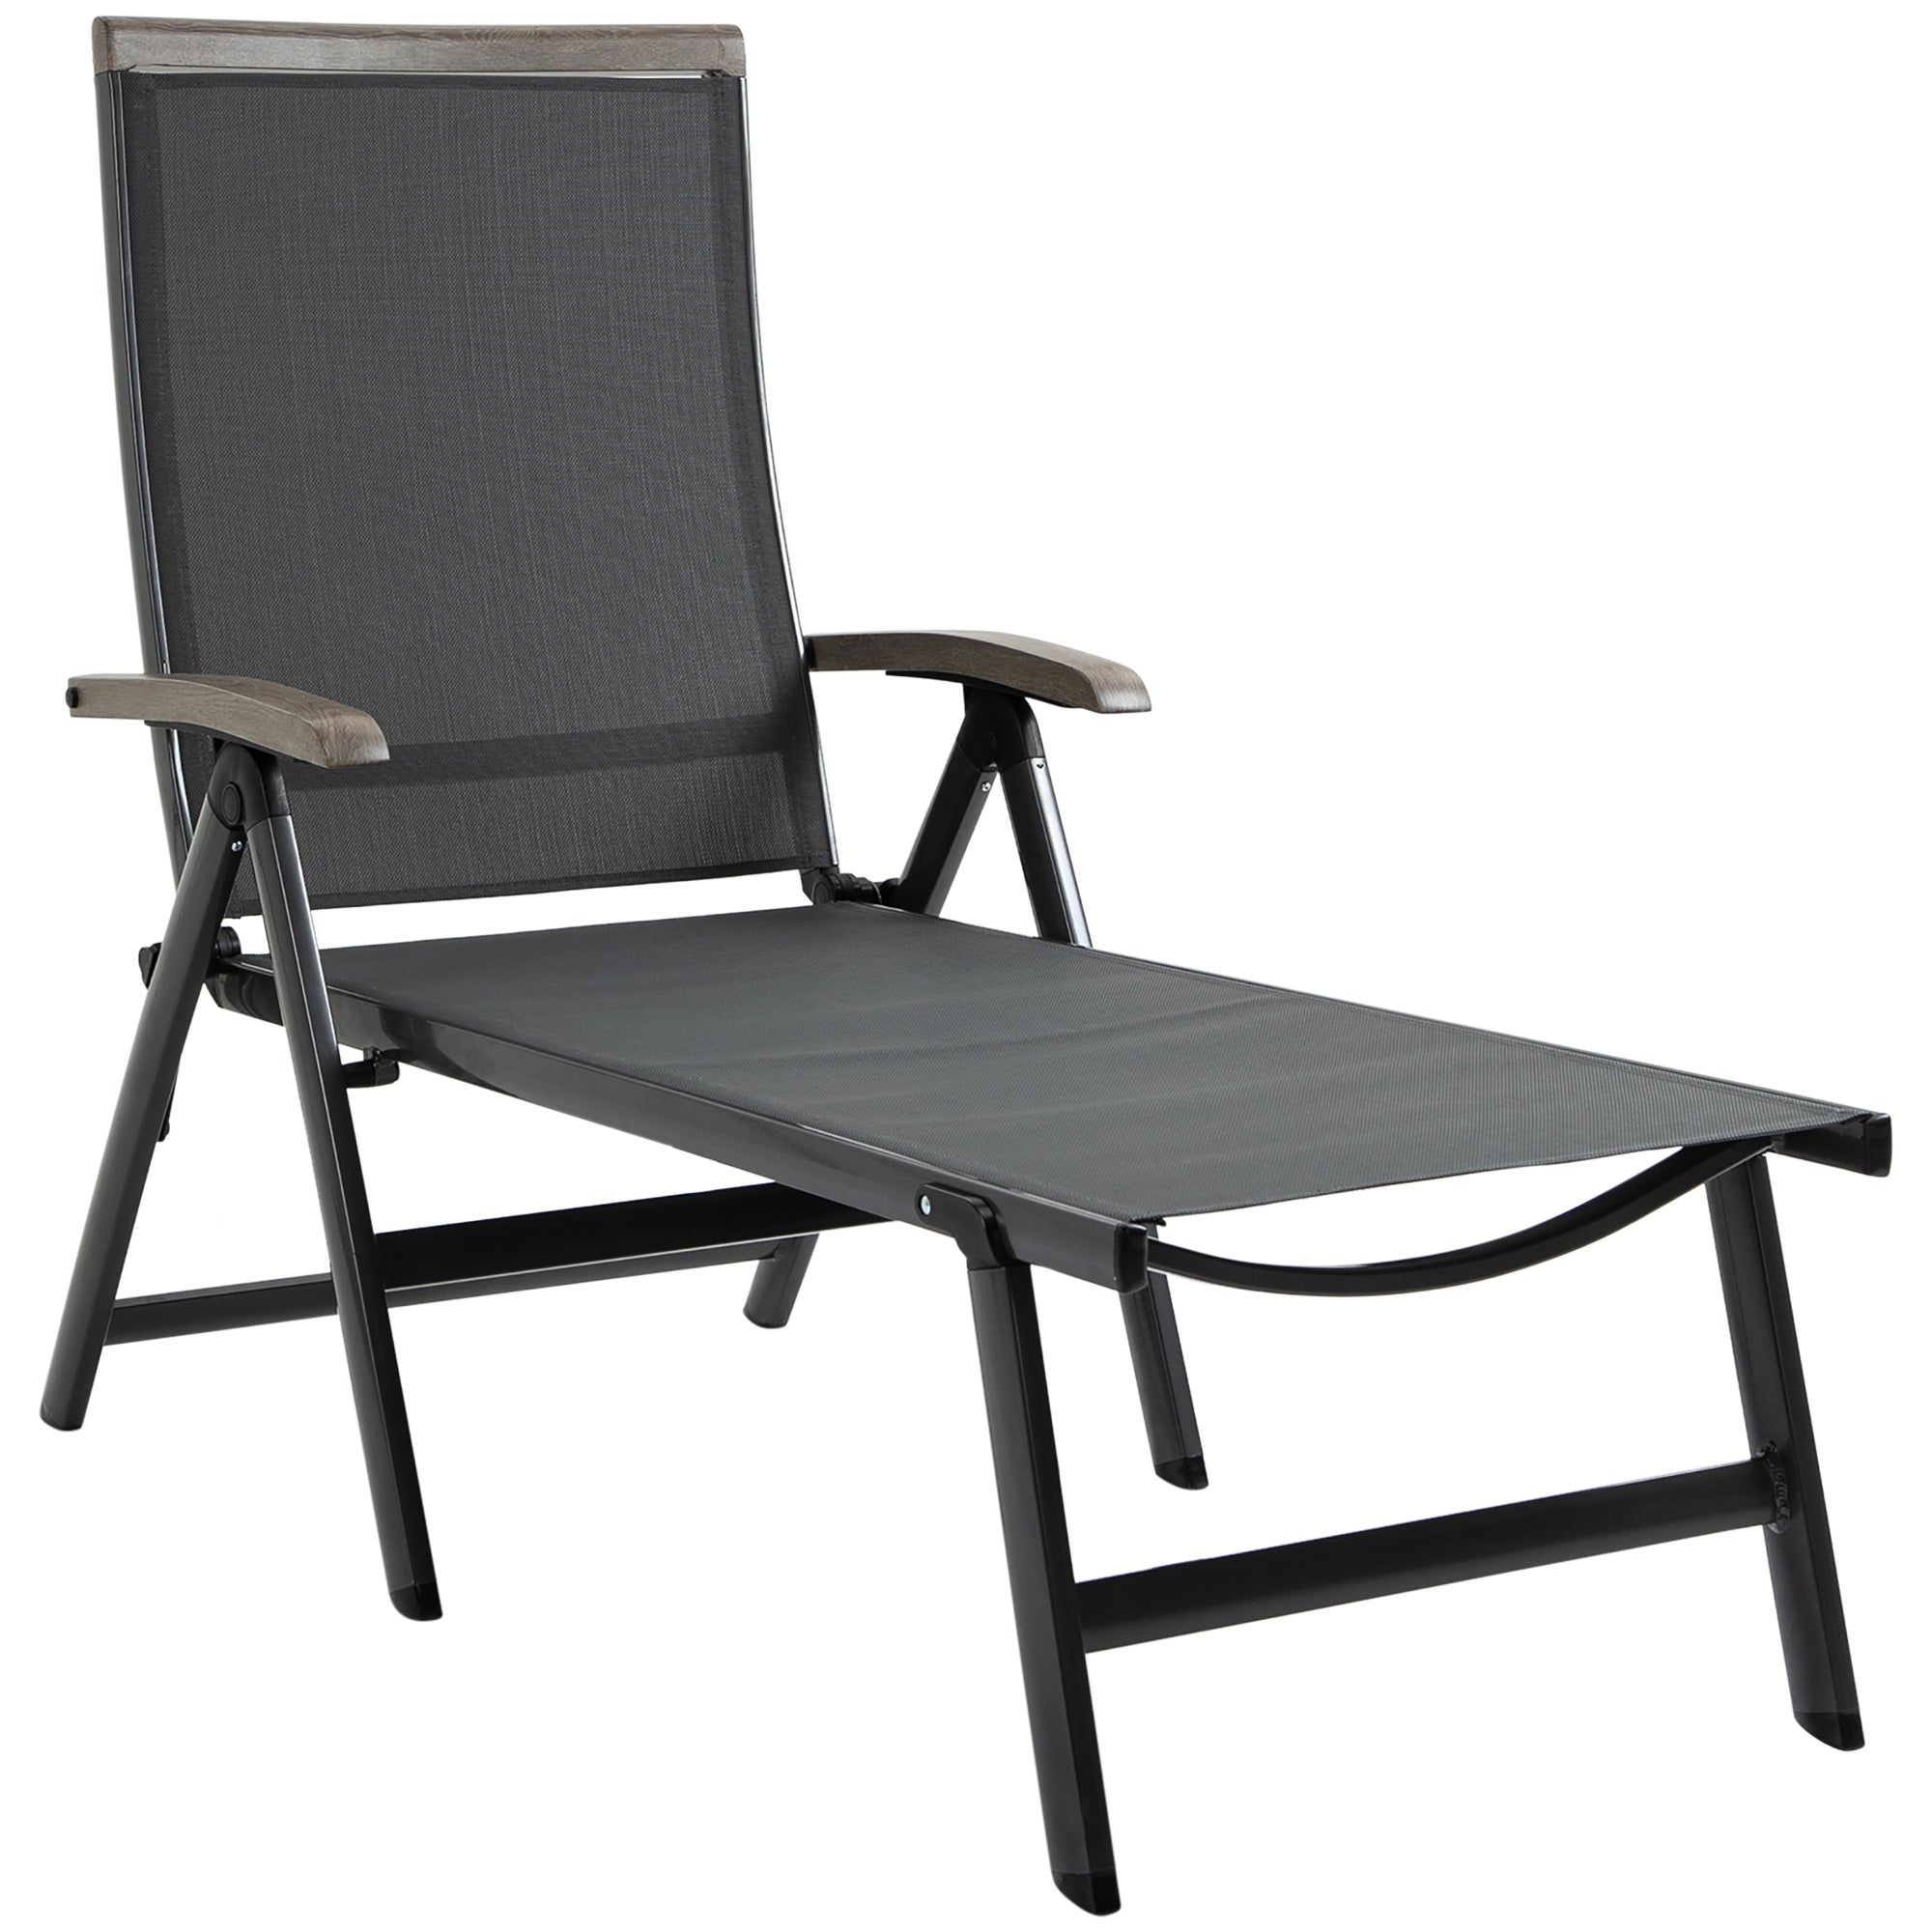 Outsunny Outdoor Folding Sun Lounger w/ Adjustable Backrest and Aluminium Grey  | TJ Hughes